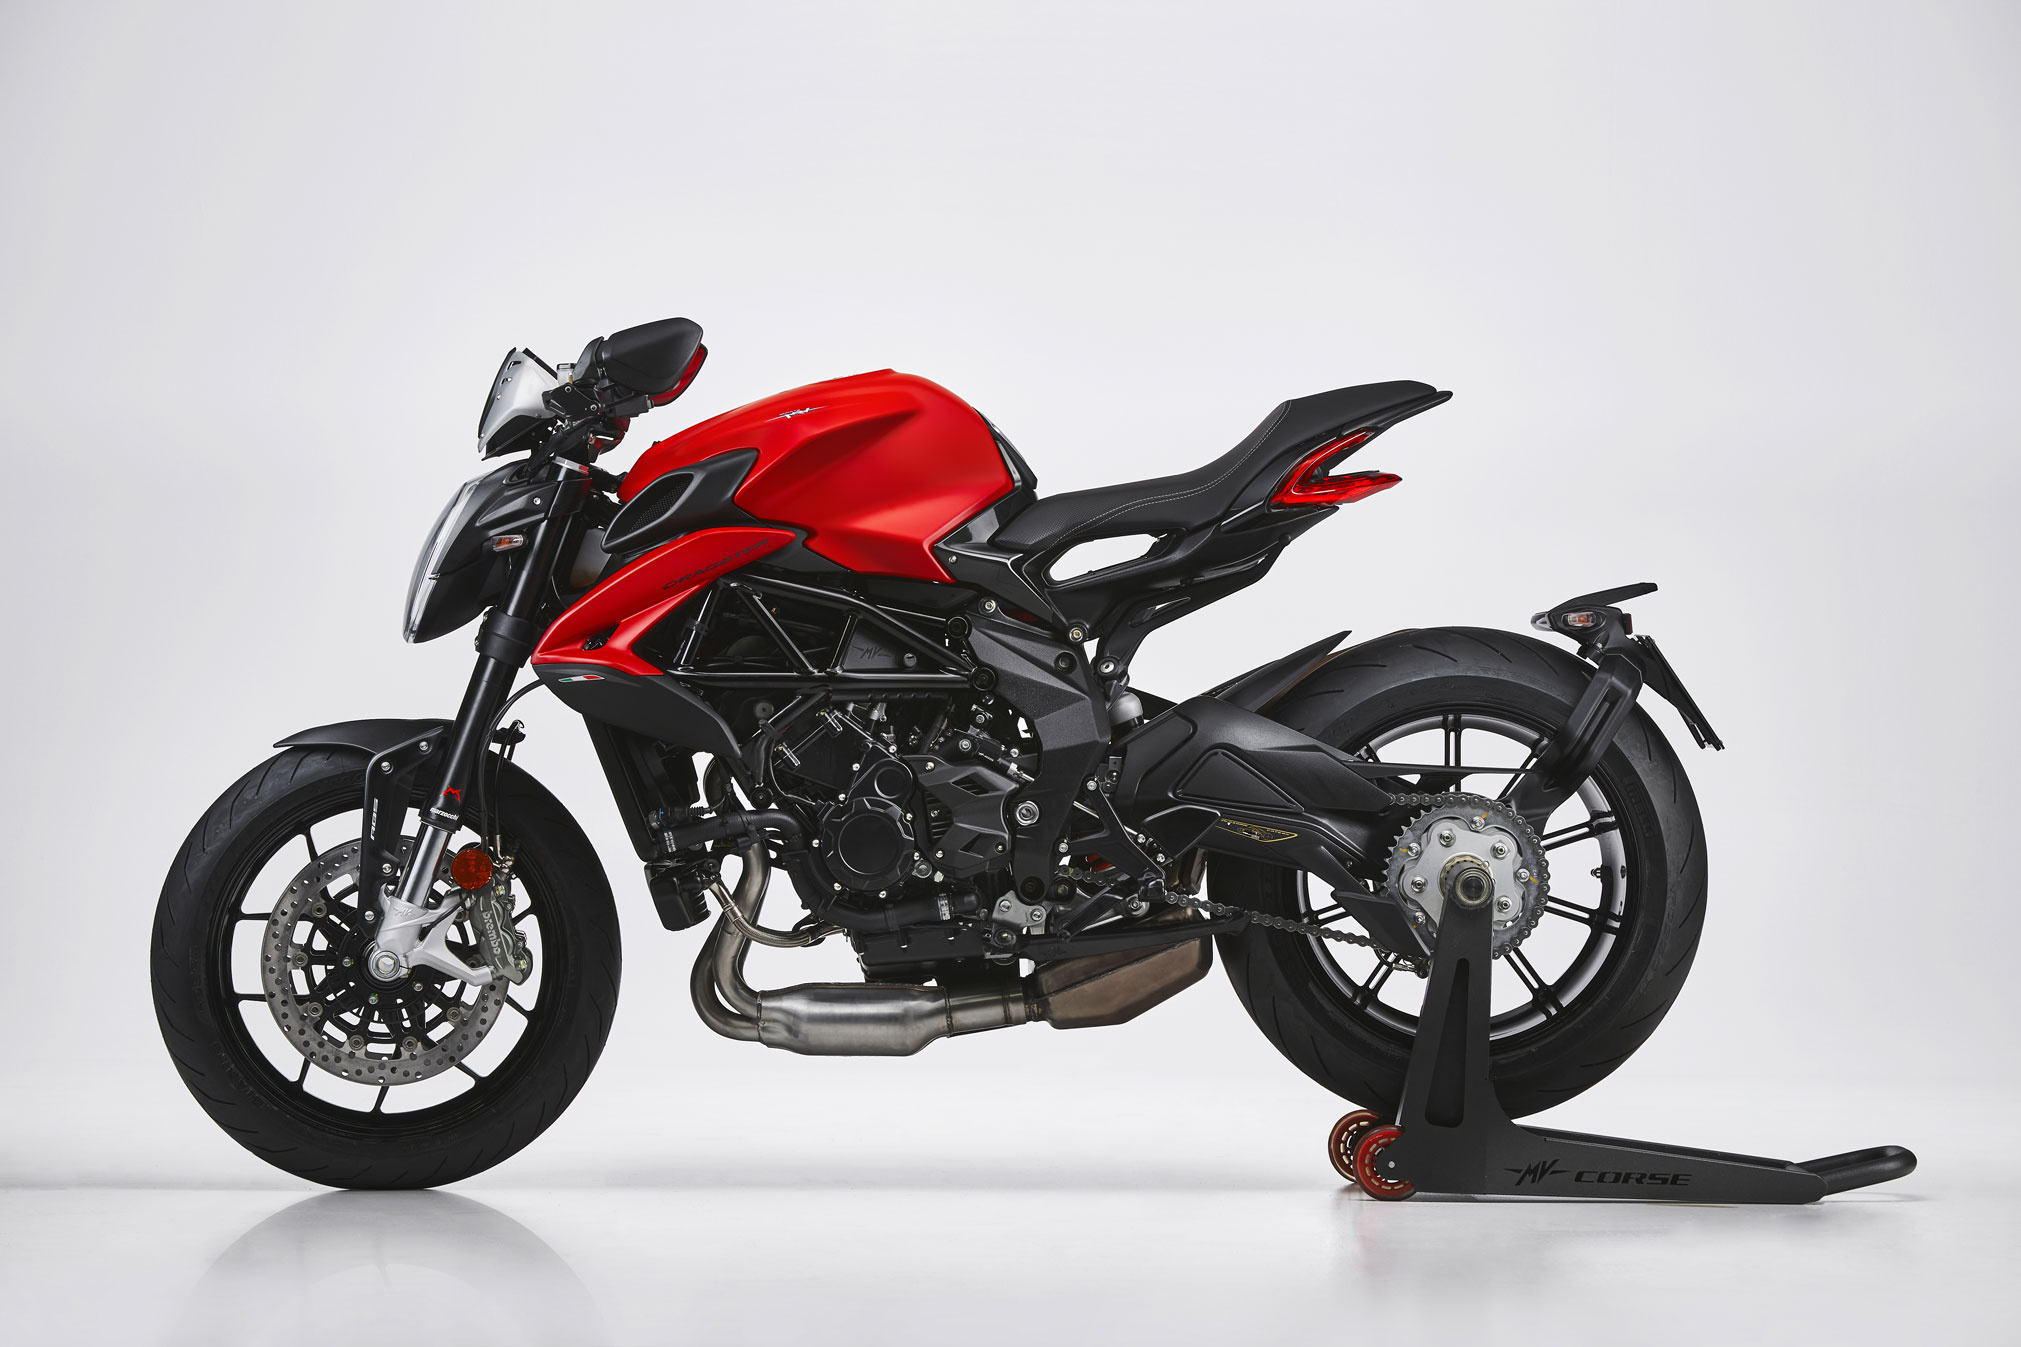 MV Agusta Dragster Rosso, Auto guide, Total motorcycle, 2021, 2030x1350 HD Desktop